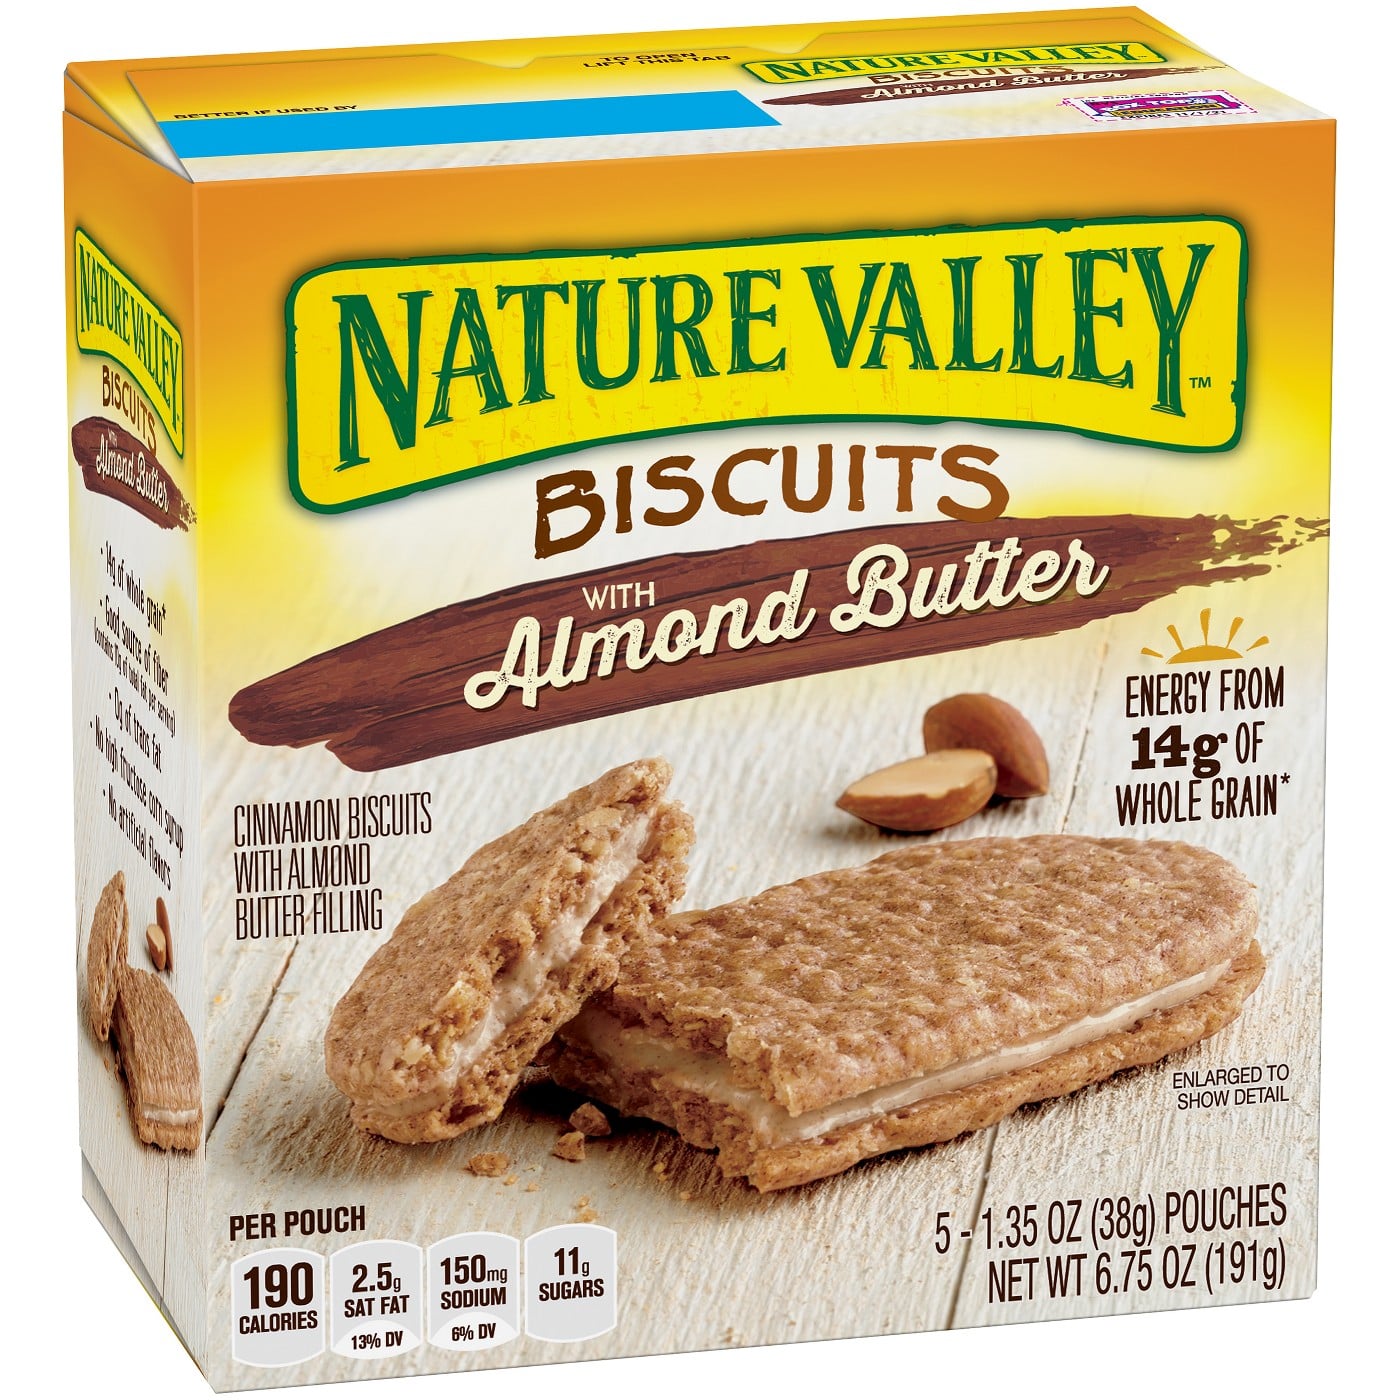 Peanut Butter And White Bread Sandwiches Eat Nature Valley Biscuits With Almond Butter Instead Eat This Not That Healthy Breakfast Alternatives Your Kids Will Still Totally Love Popsugar Family Photo 16